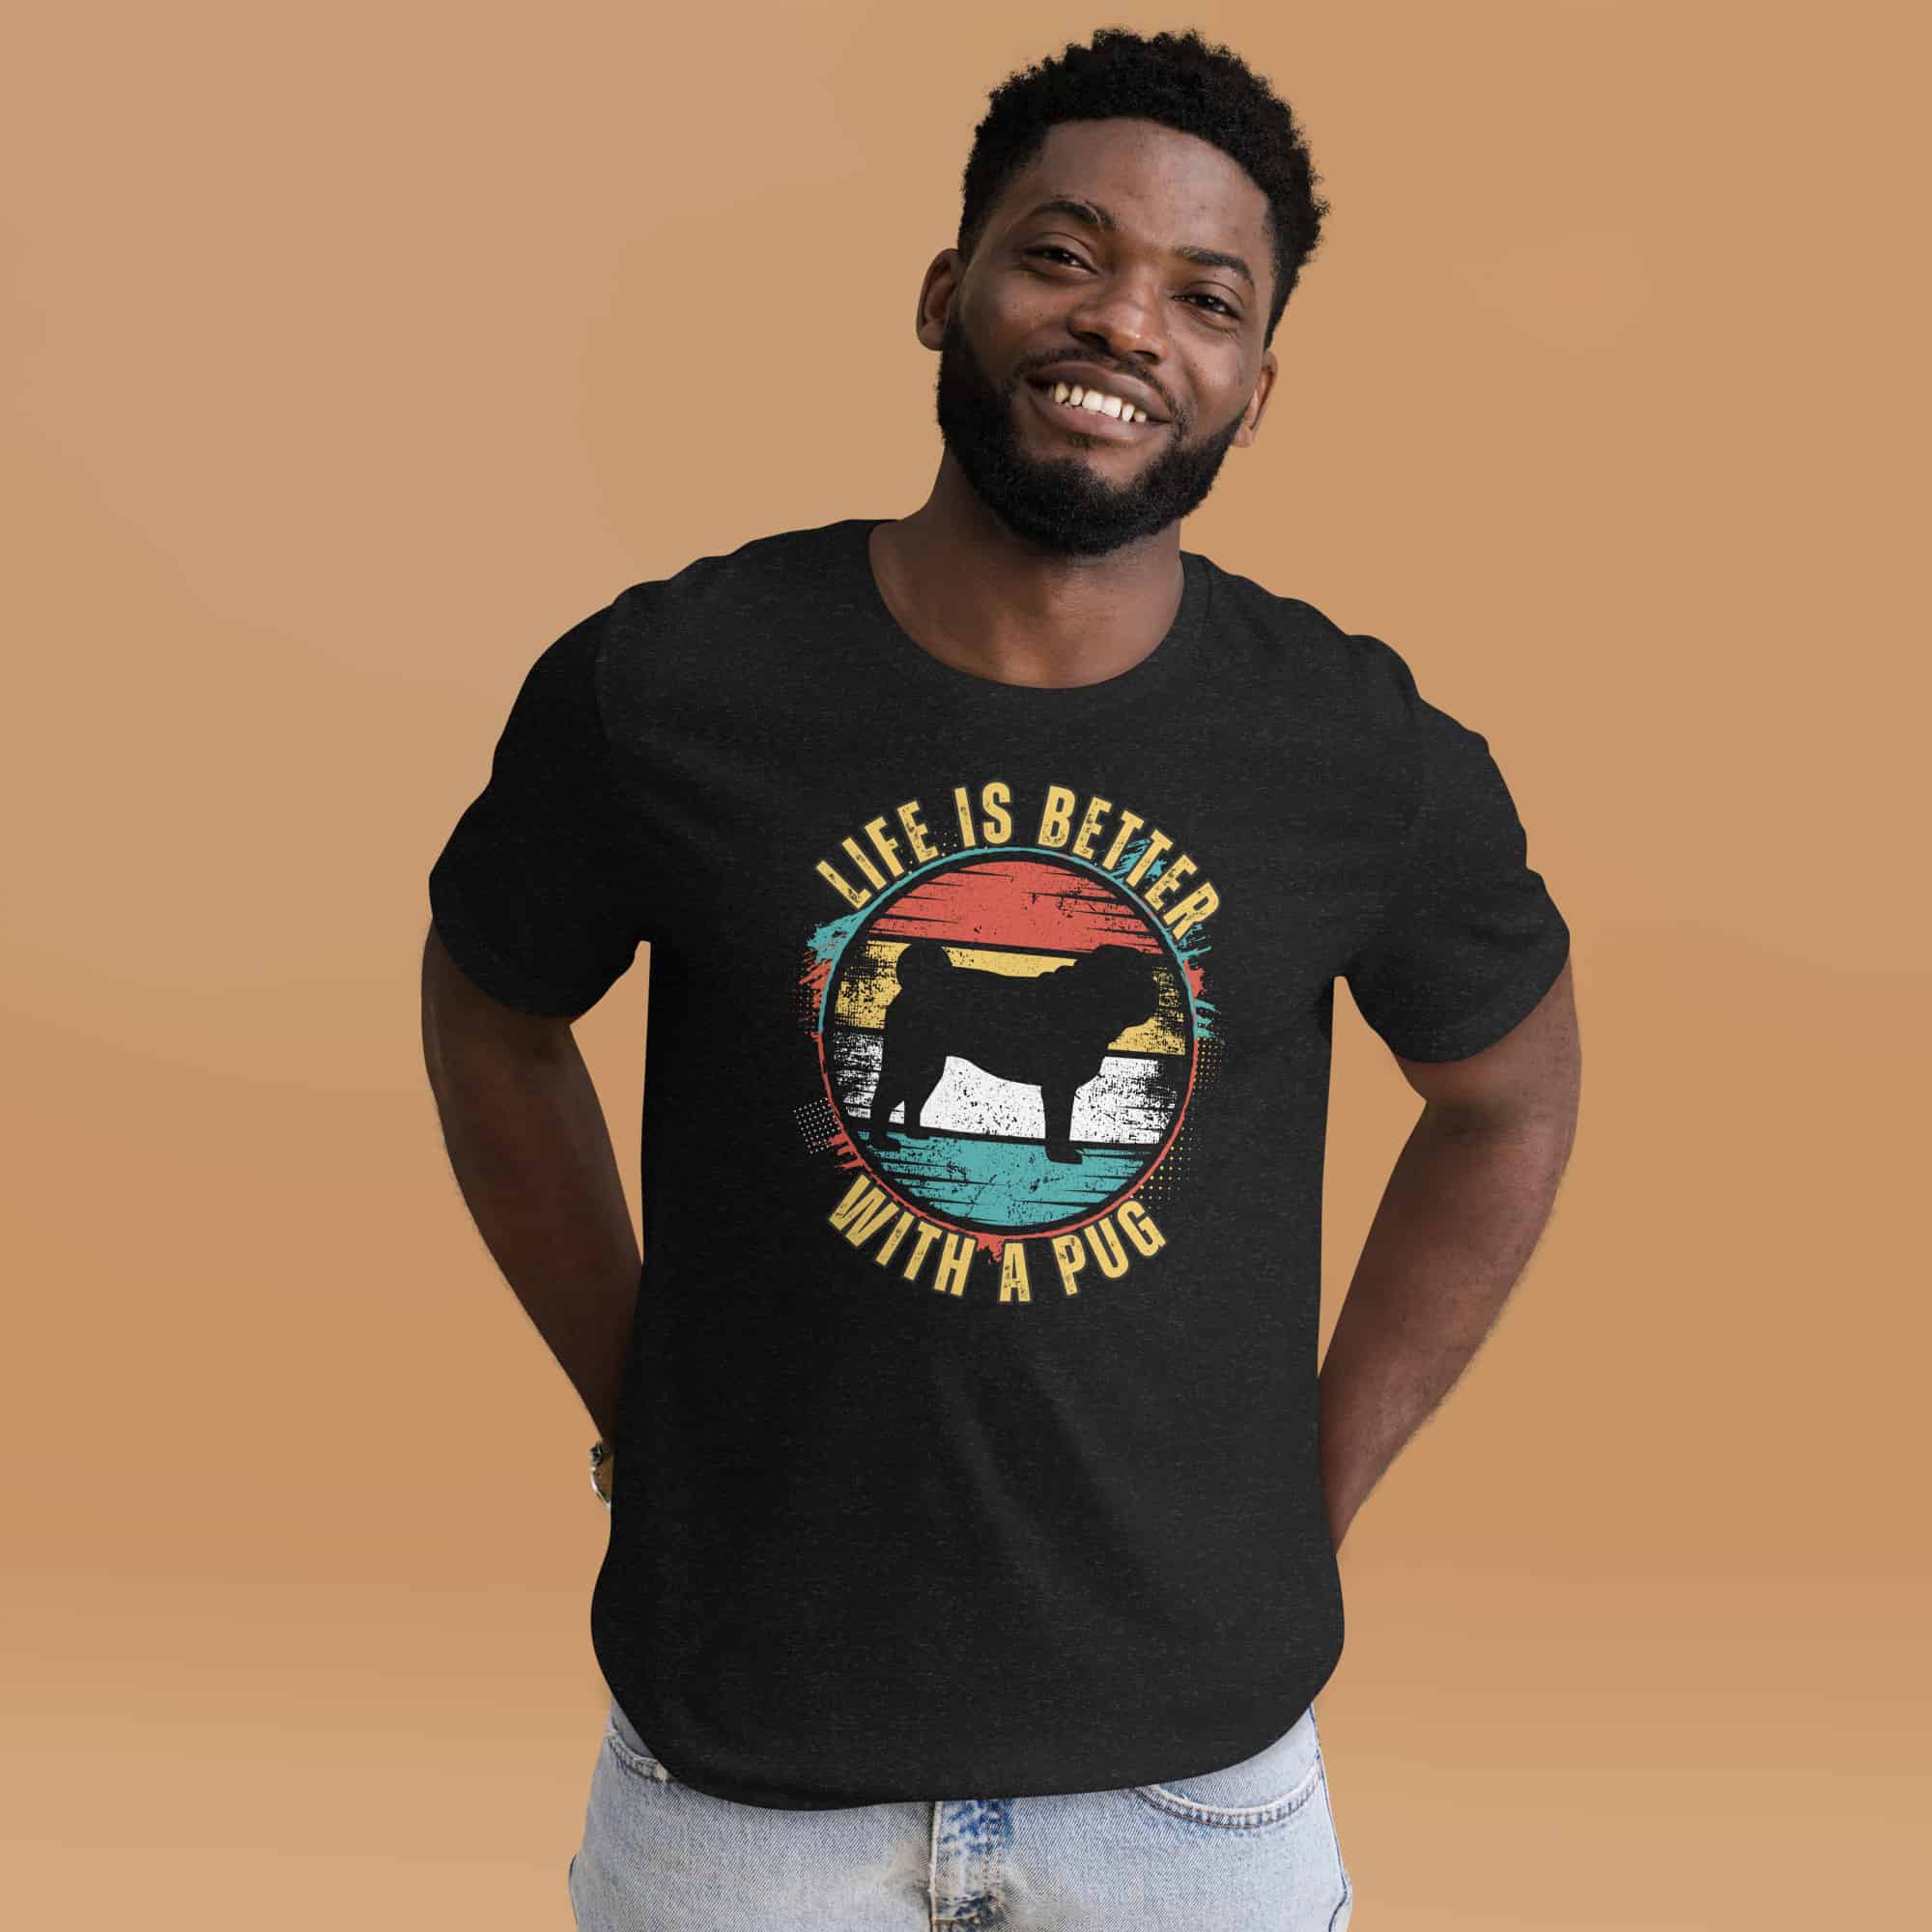 Life is Better With A Pug Unisex T-Shirt